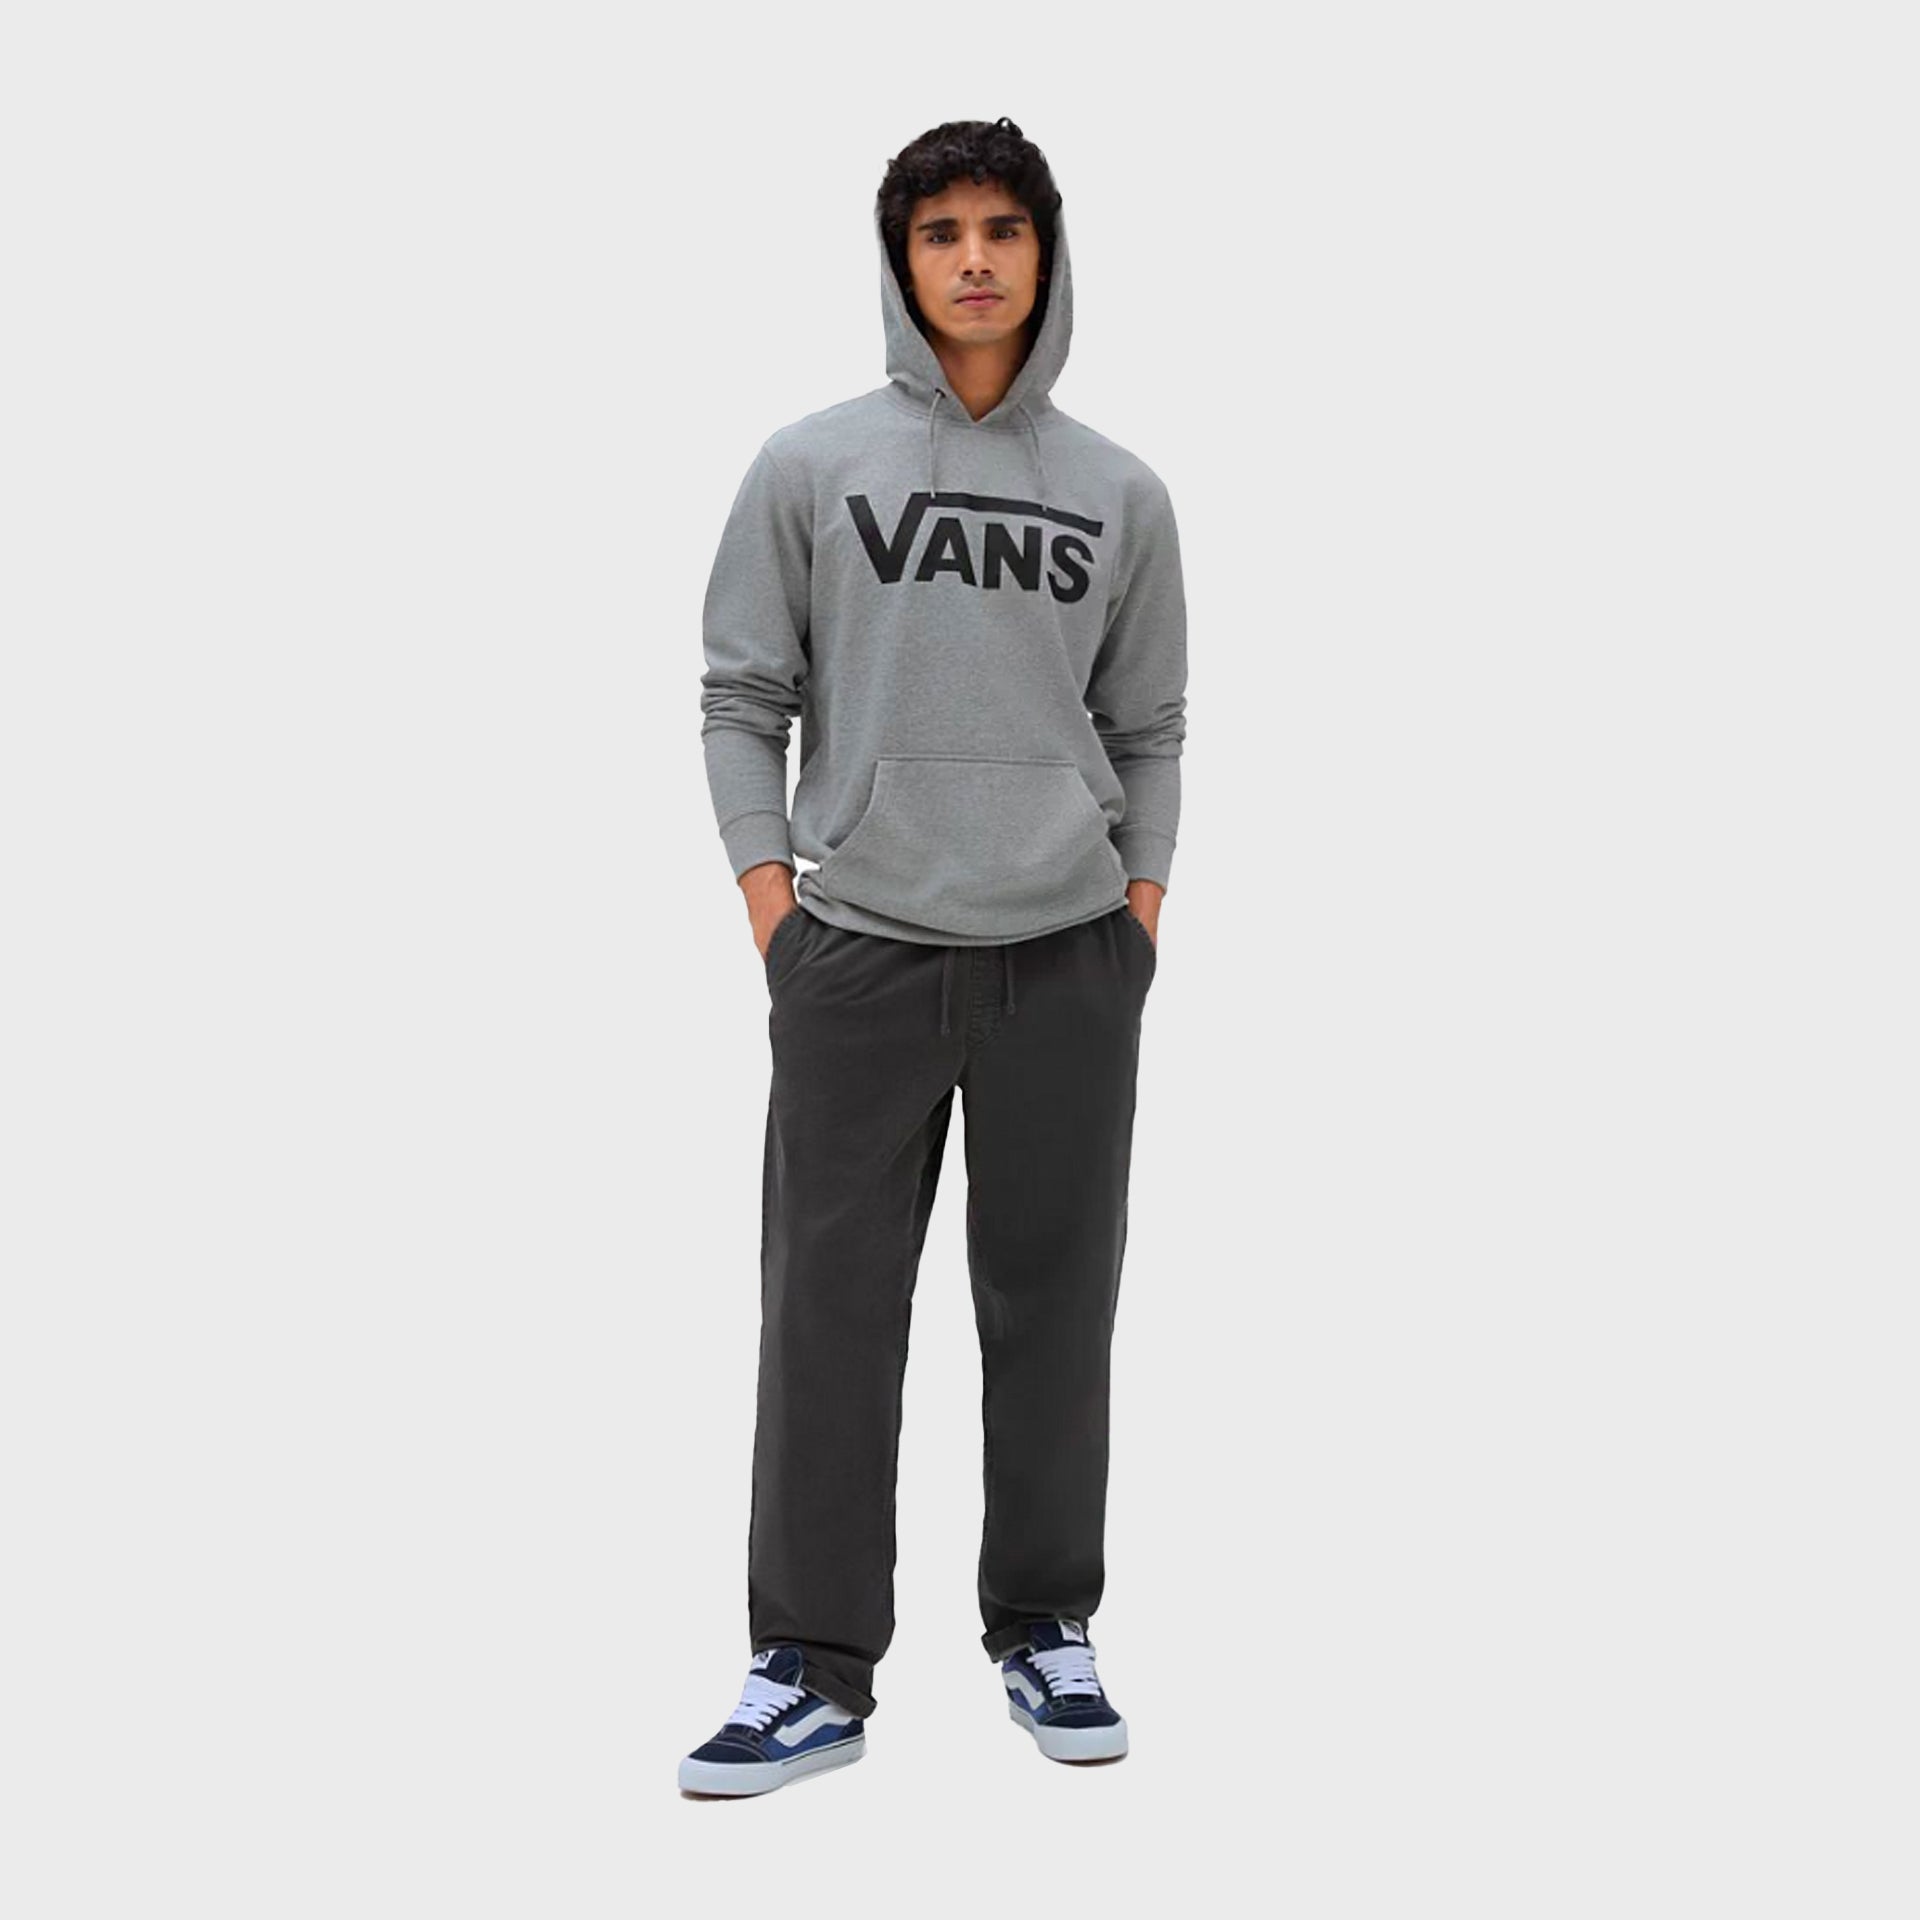 Classic Mens Pullover Hoodie - Cement Heather Grey Black - ManGo Surfing